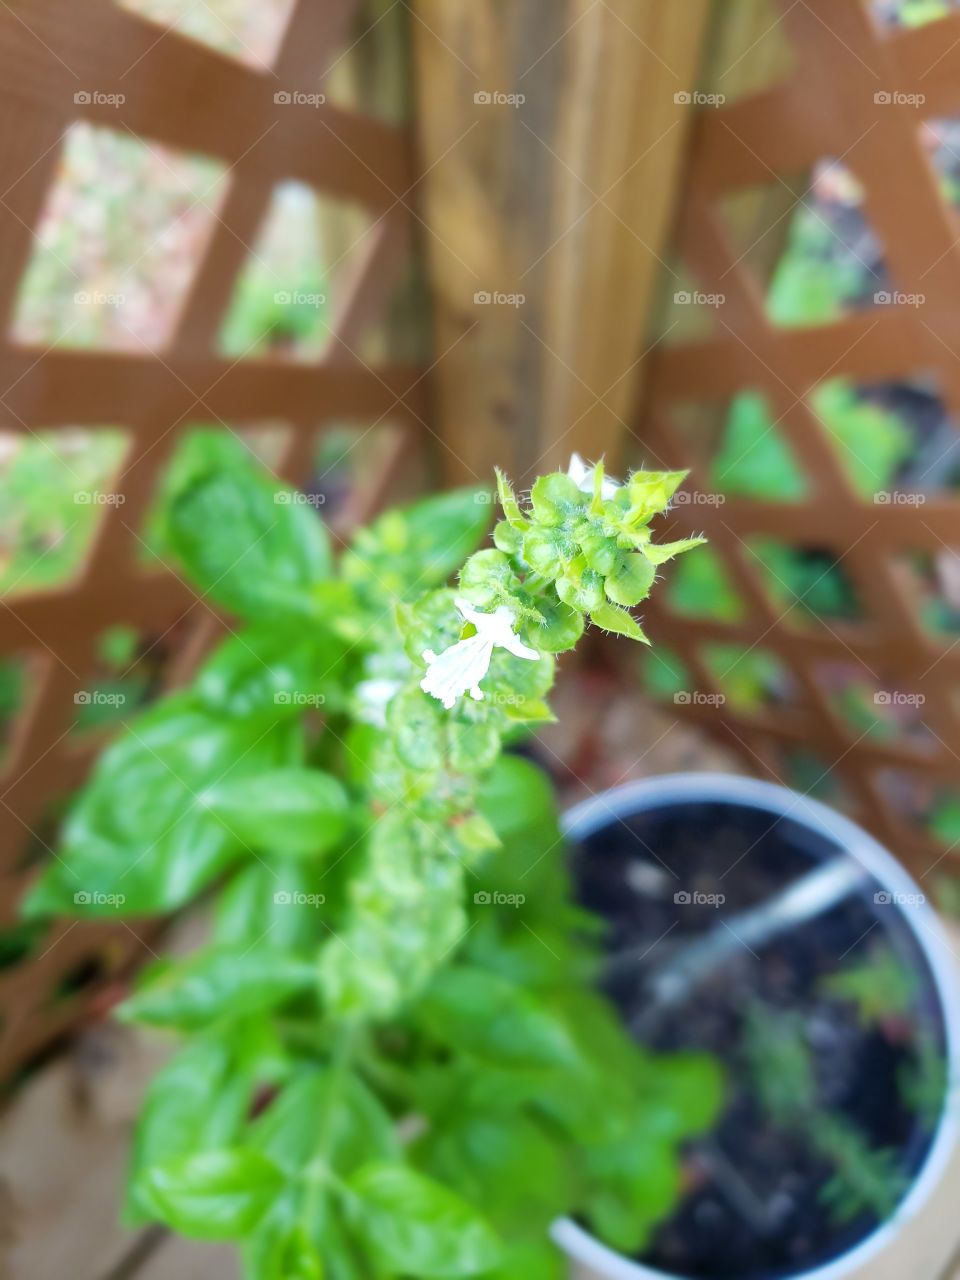 Flowering Basil gone to seed